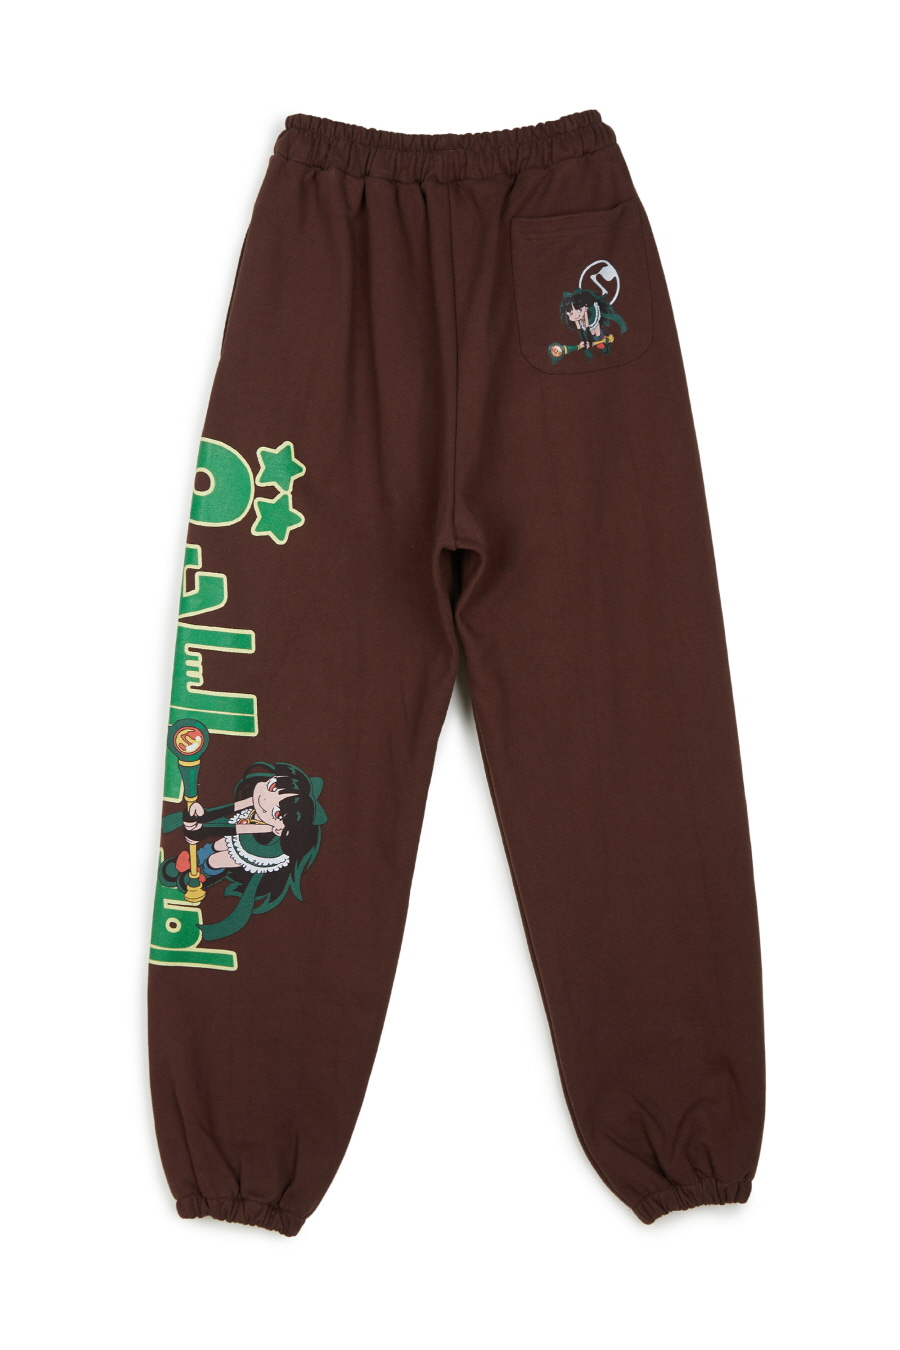 THE WITCH Heavy Weight Fleece Sweat Pants - Hickory Brown